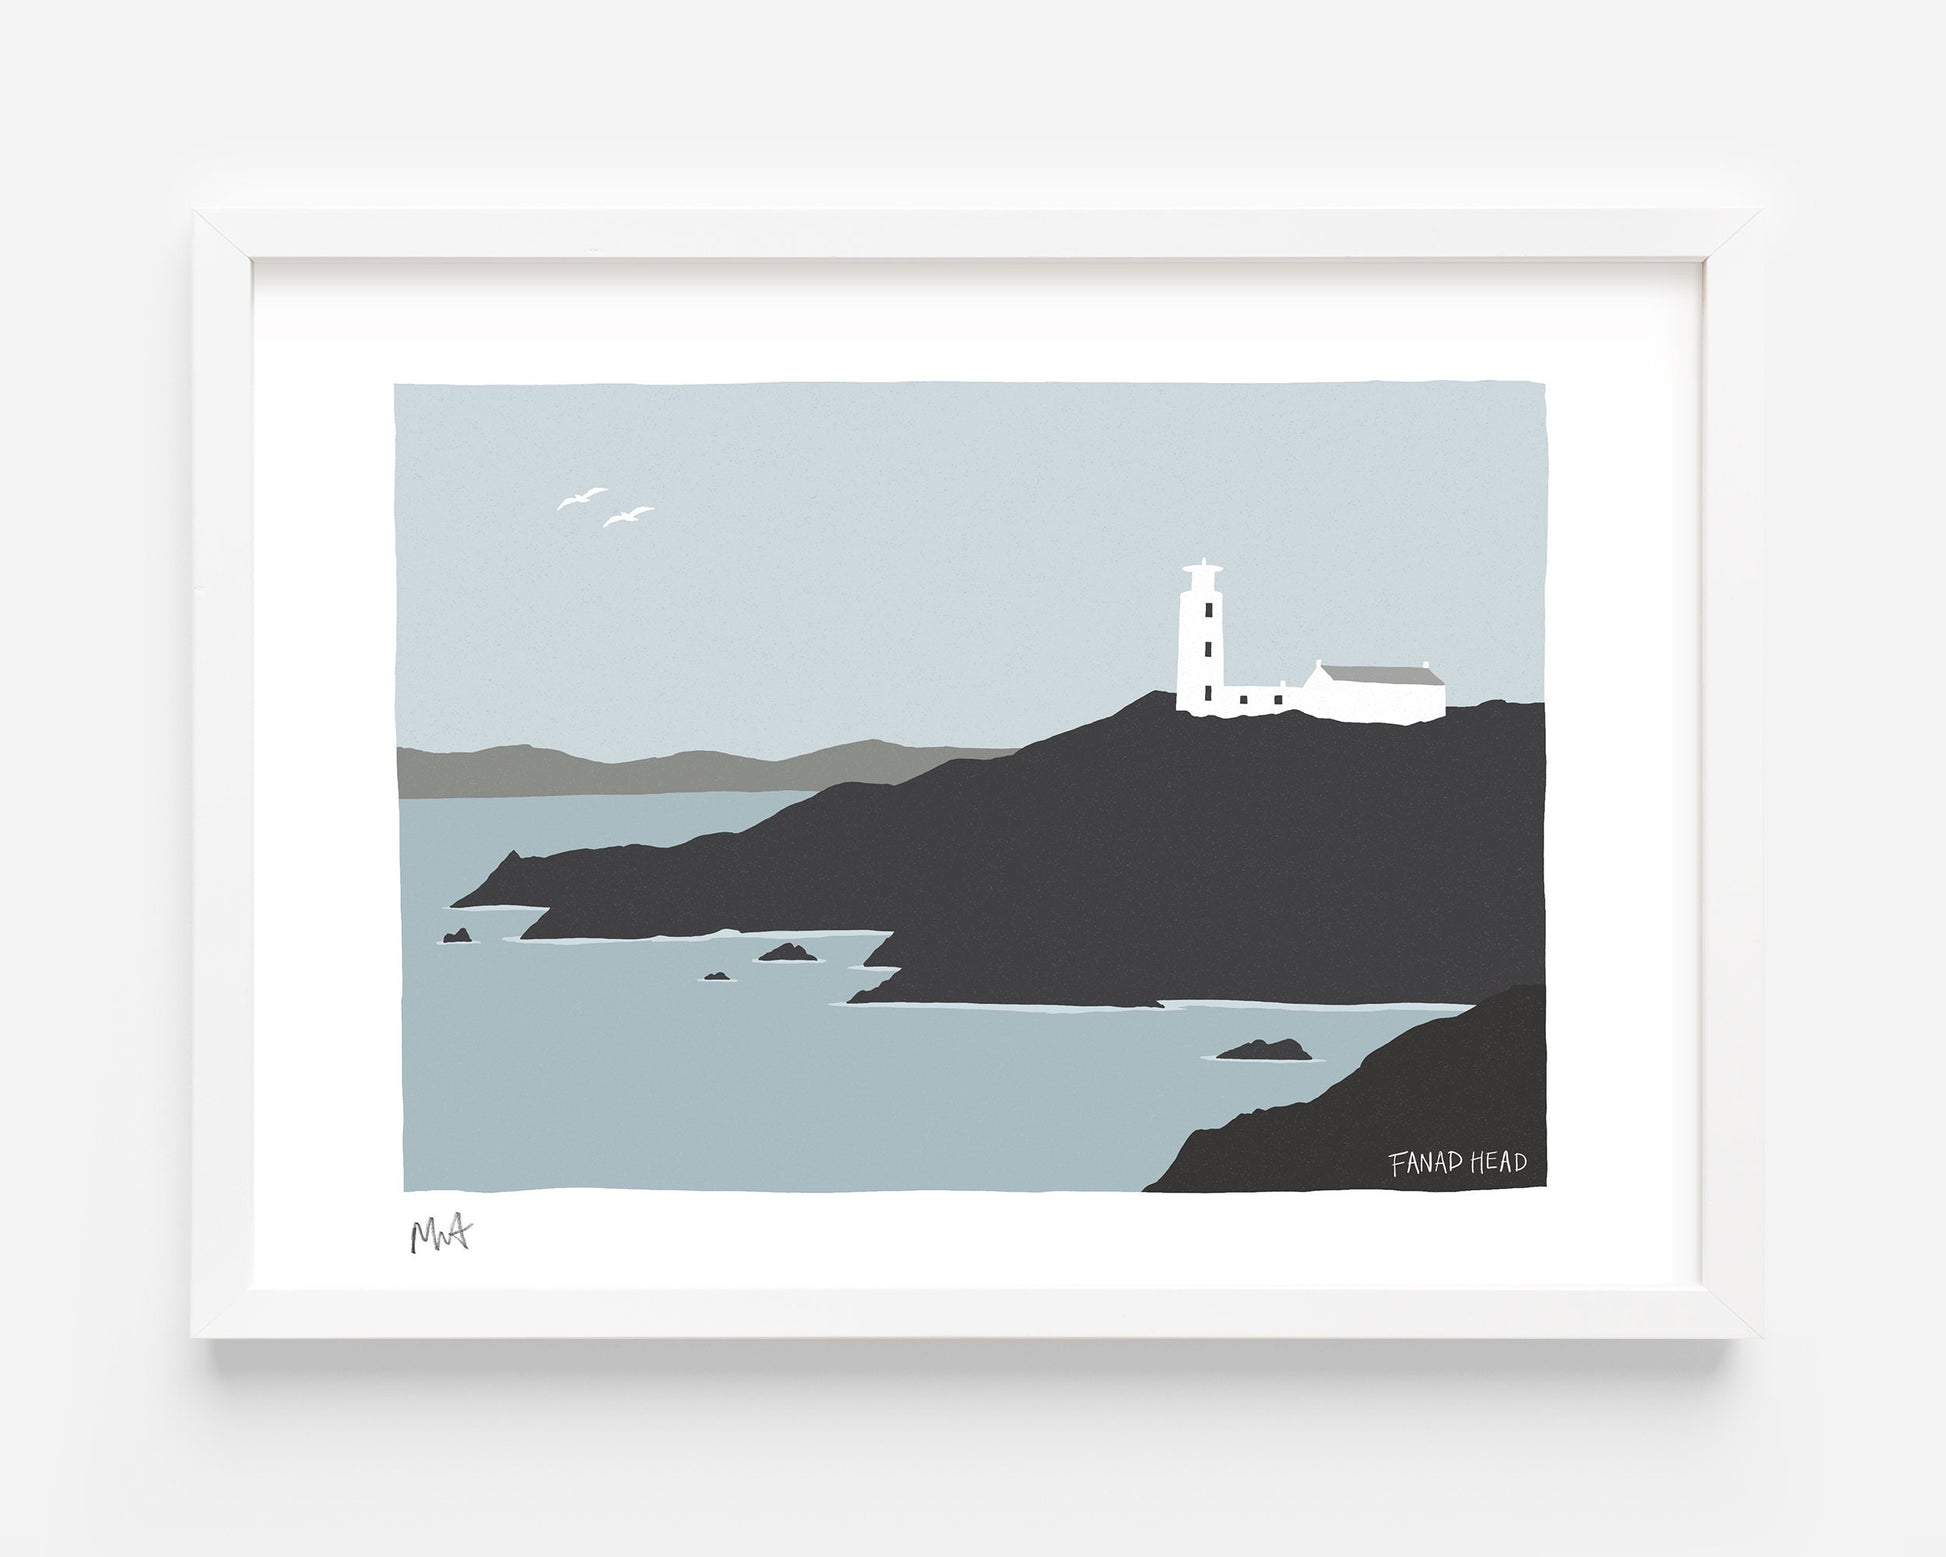 FANAD HEAD LIGHTHOUSE, Donegal, Ireland – A4 / A3 print